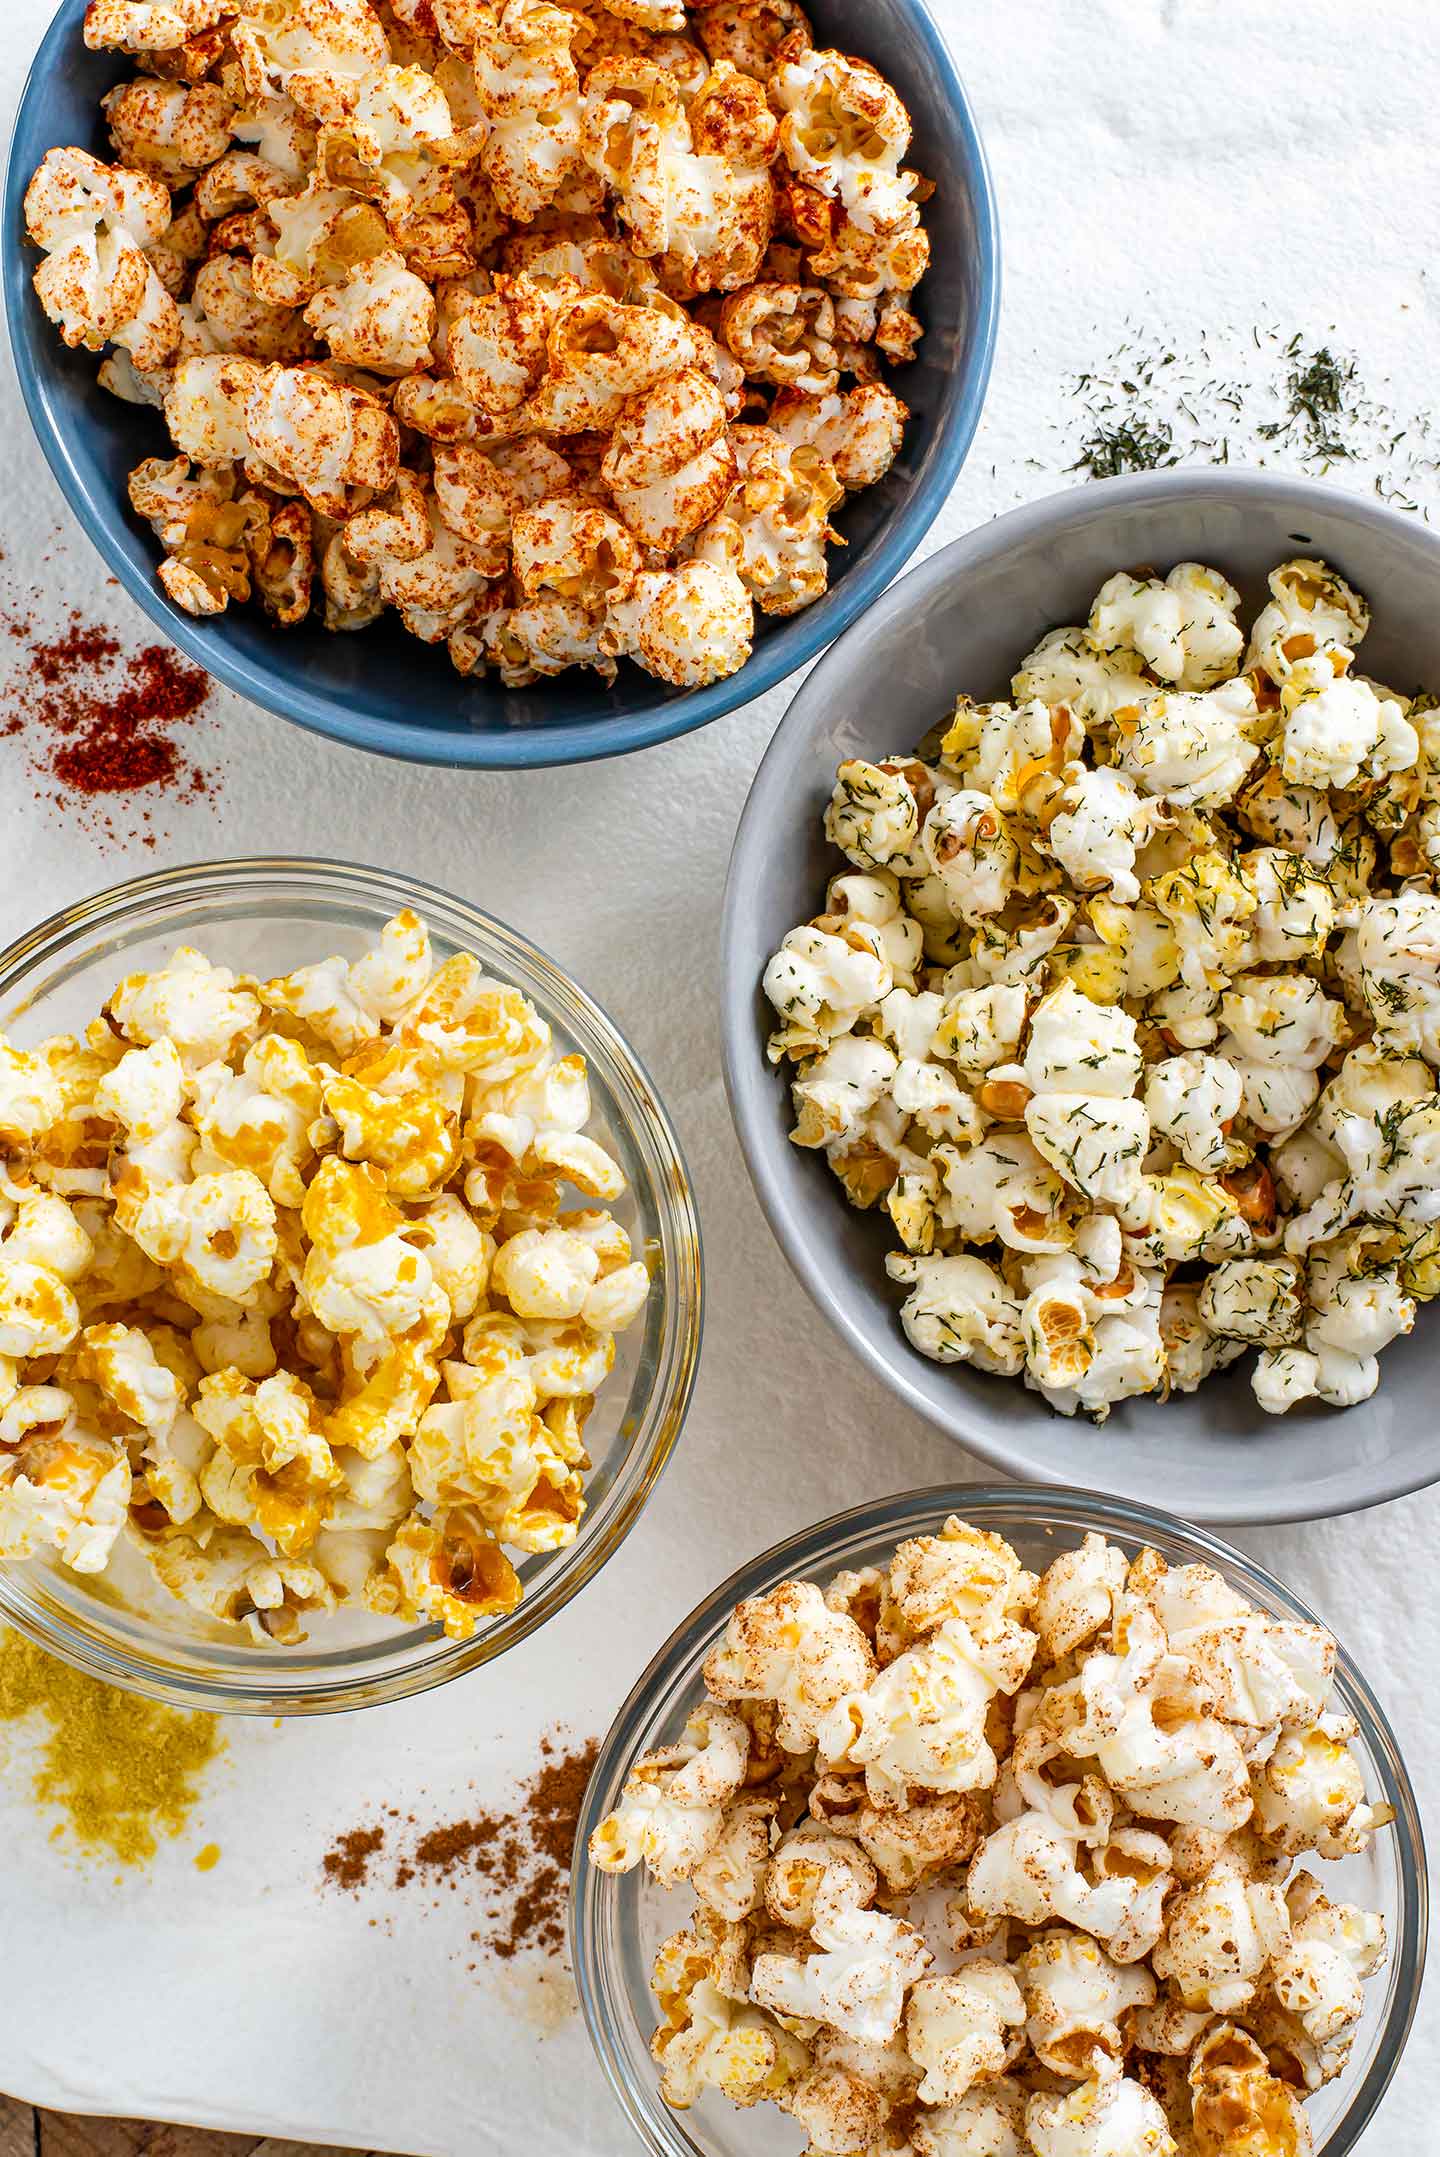 Top down view of four small bowls with different flavoured popcorn. The corresponding seasonings are spread on a white tray next to the bowls.